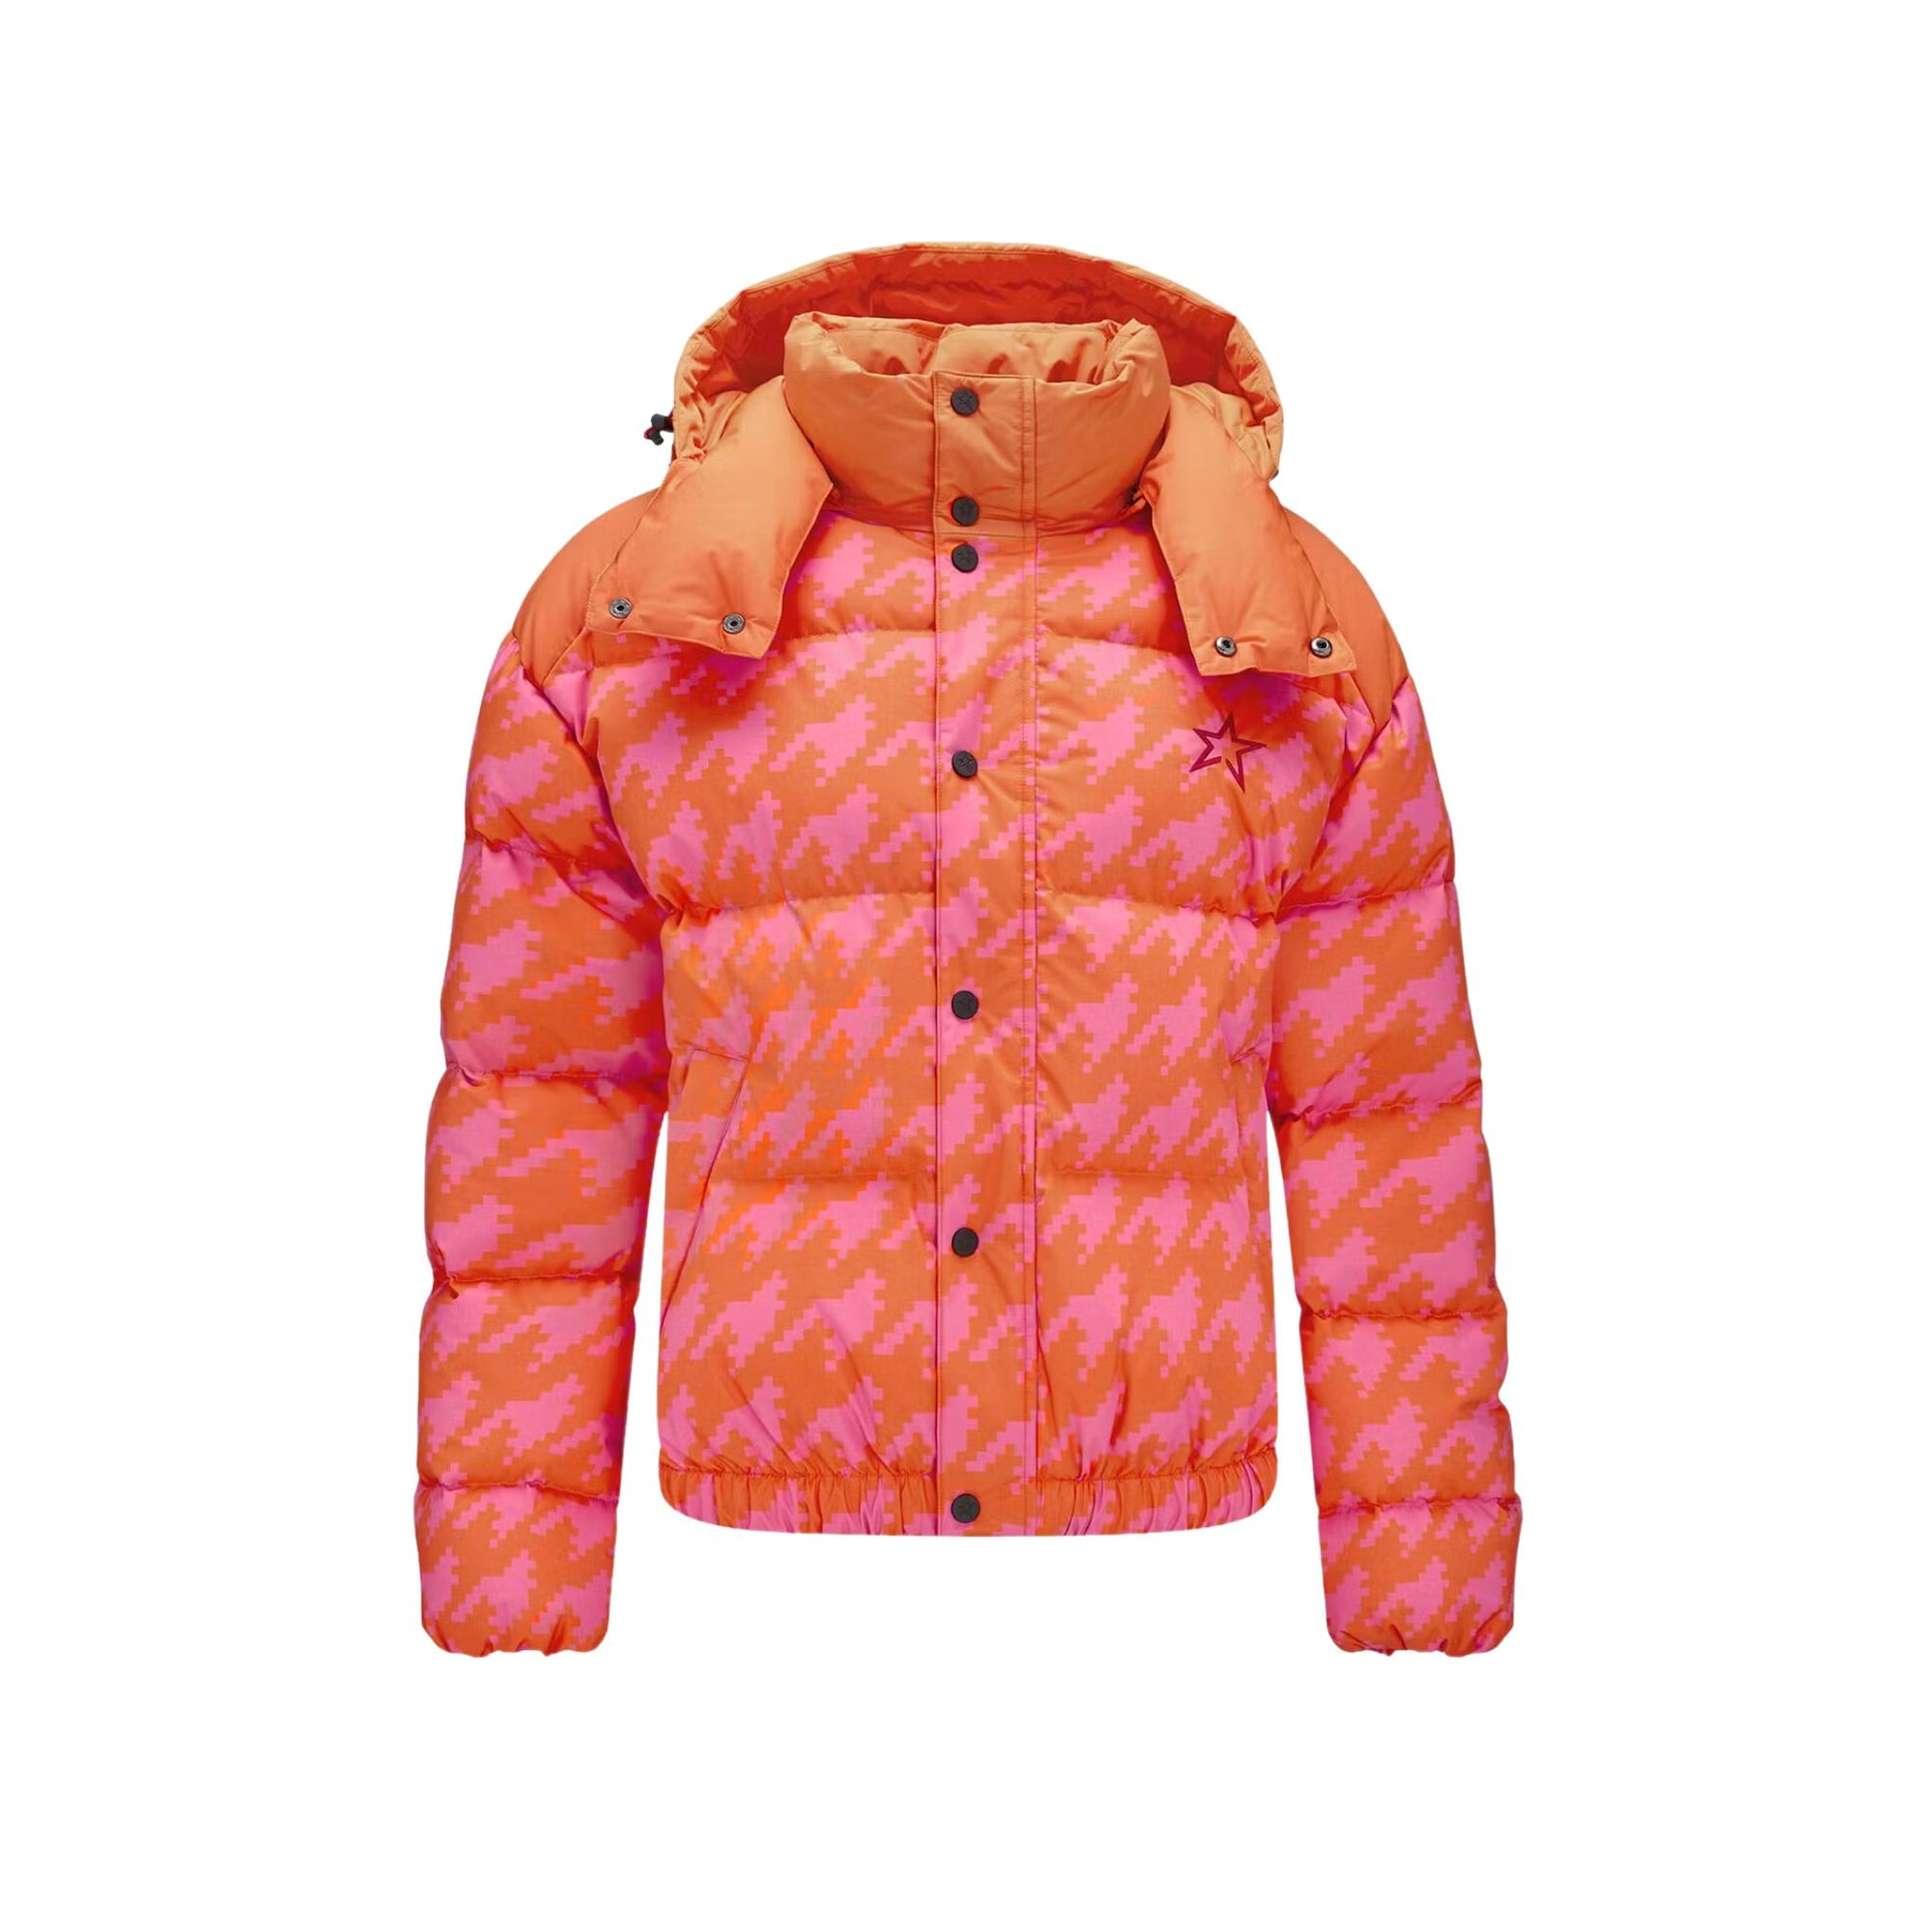 Womens Perfect Moment Puffer II Jacket - Houndstooth Azela Pink/Red Jackets Perfect Moment XS INTL / 6-8 AU 